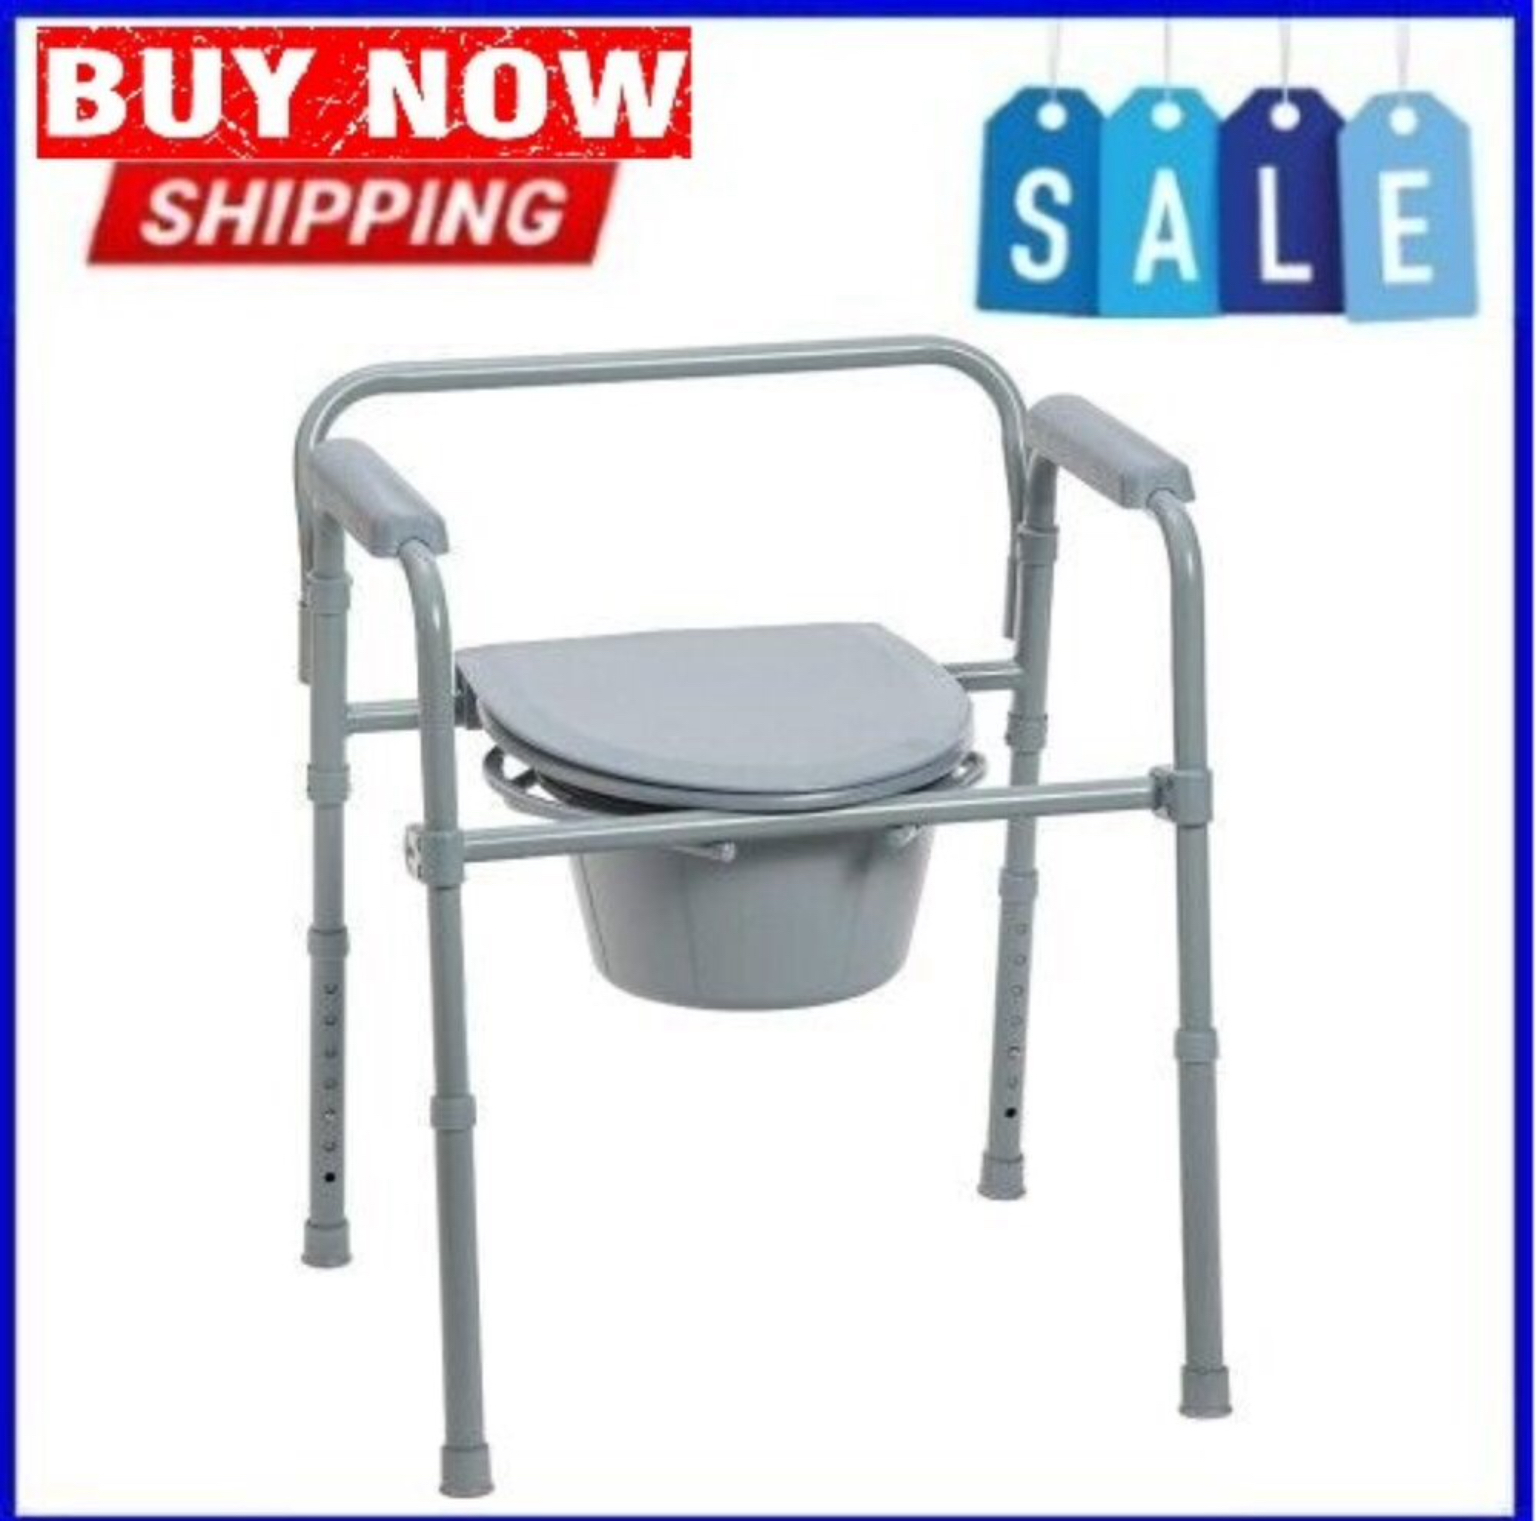 DRIVE MEDICAL Bedside COMMODE CHAIR Portable SHOWER CHAIR ????BUY NOW!?? - $49.00